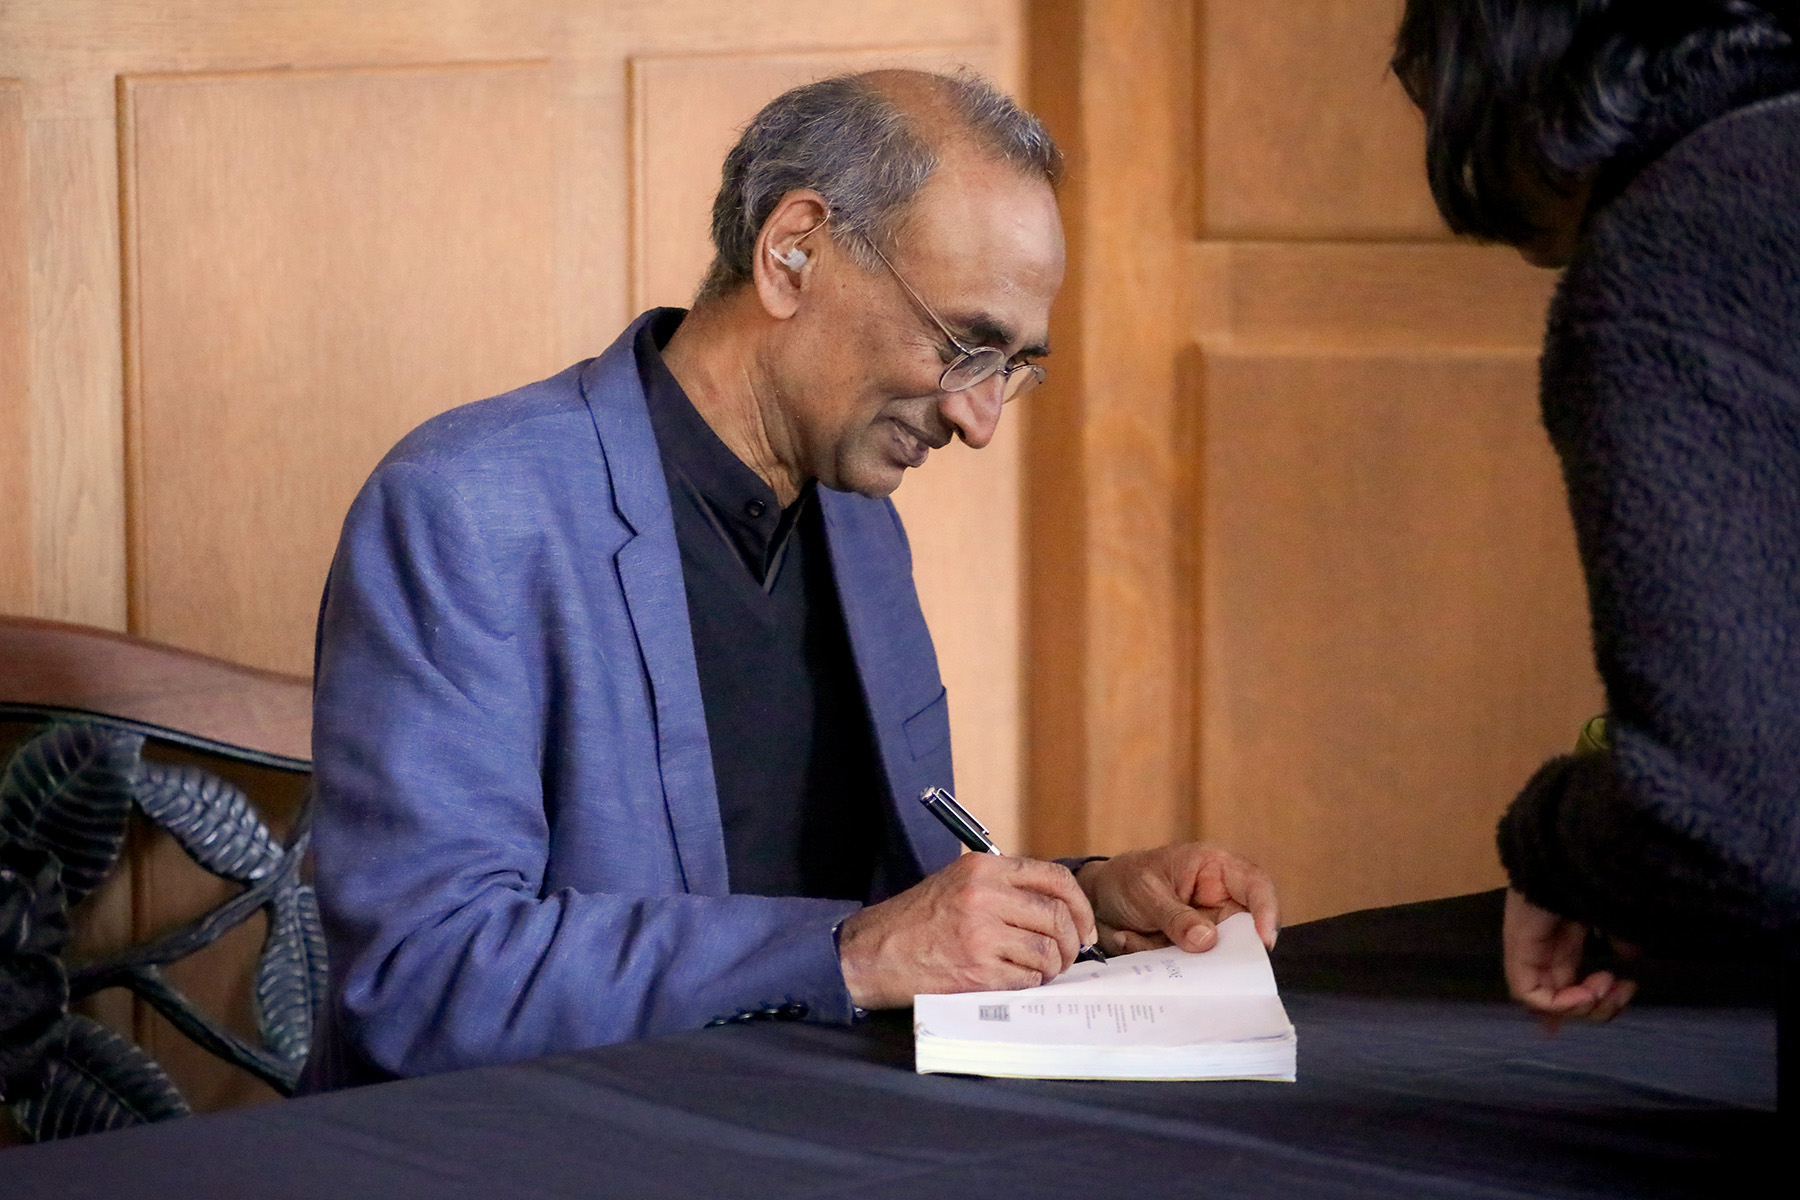 Venkatraman “Venki” Ramakrishnan greets guests during a signing of his book “Gene Machine: The Race to Decipher the Secrets of the Ribosome.” (Devin Bittner)